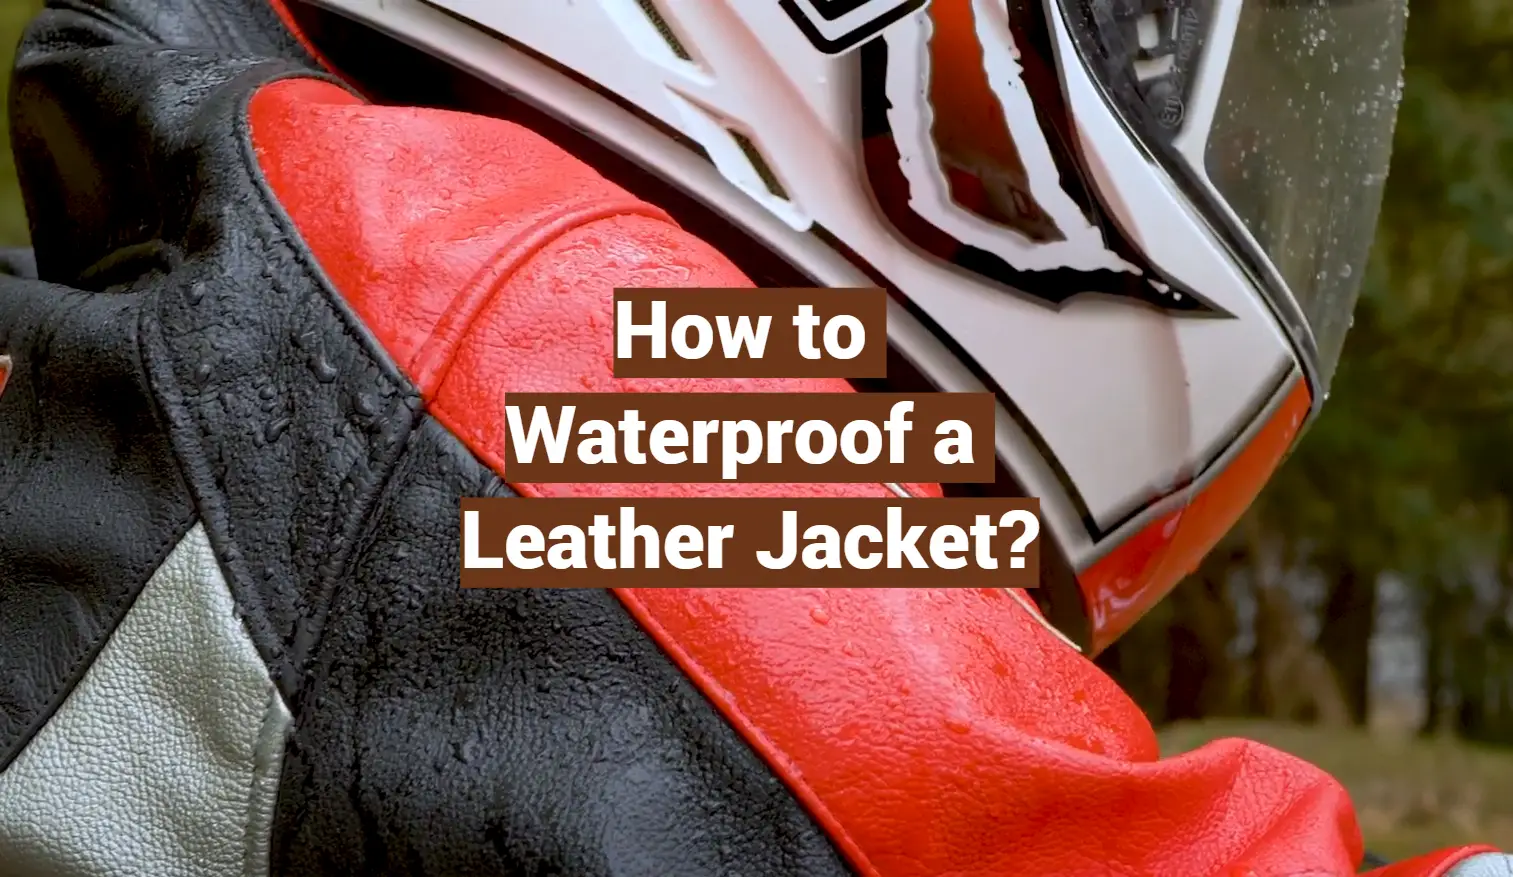 How to Waterproof a Leather Jacket?